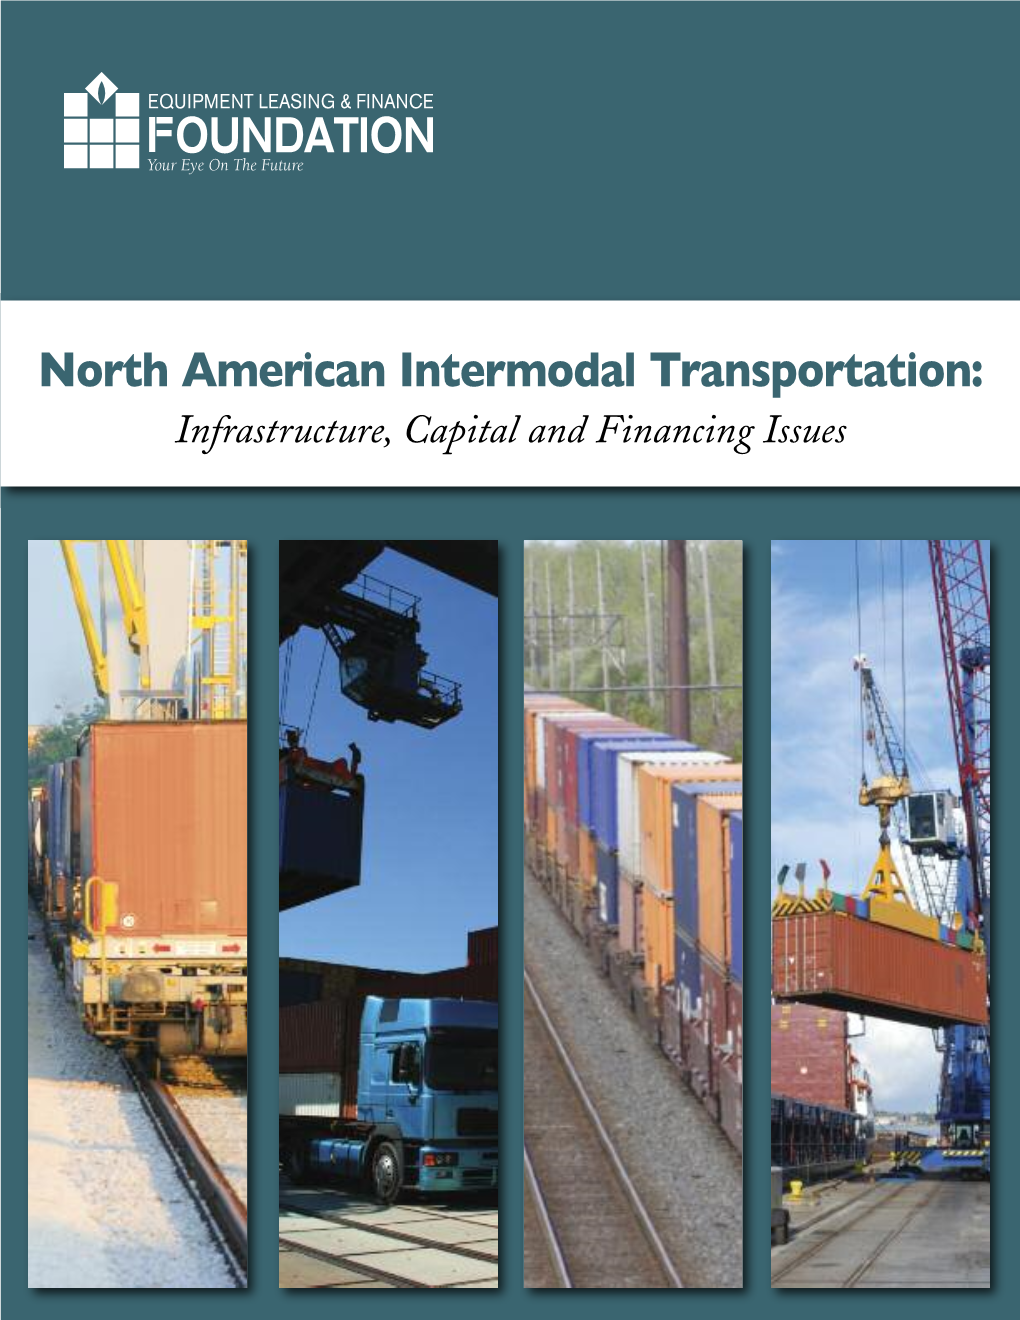 North American Intermodal Transportation: Infrastructure, Capital and Financing Issues EQUIPMENT LEASING & FINANCE OUN DAT IO N Your Eye on the Future